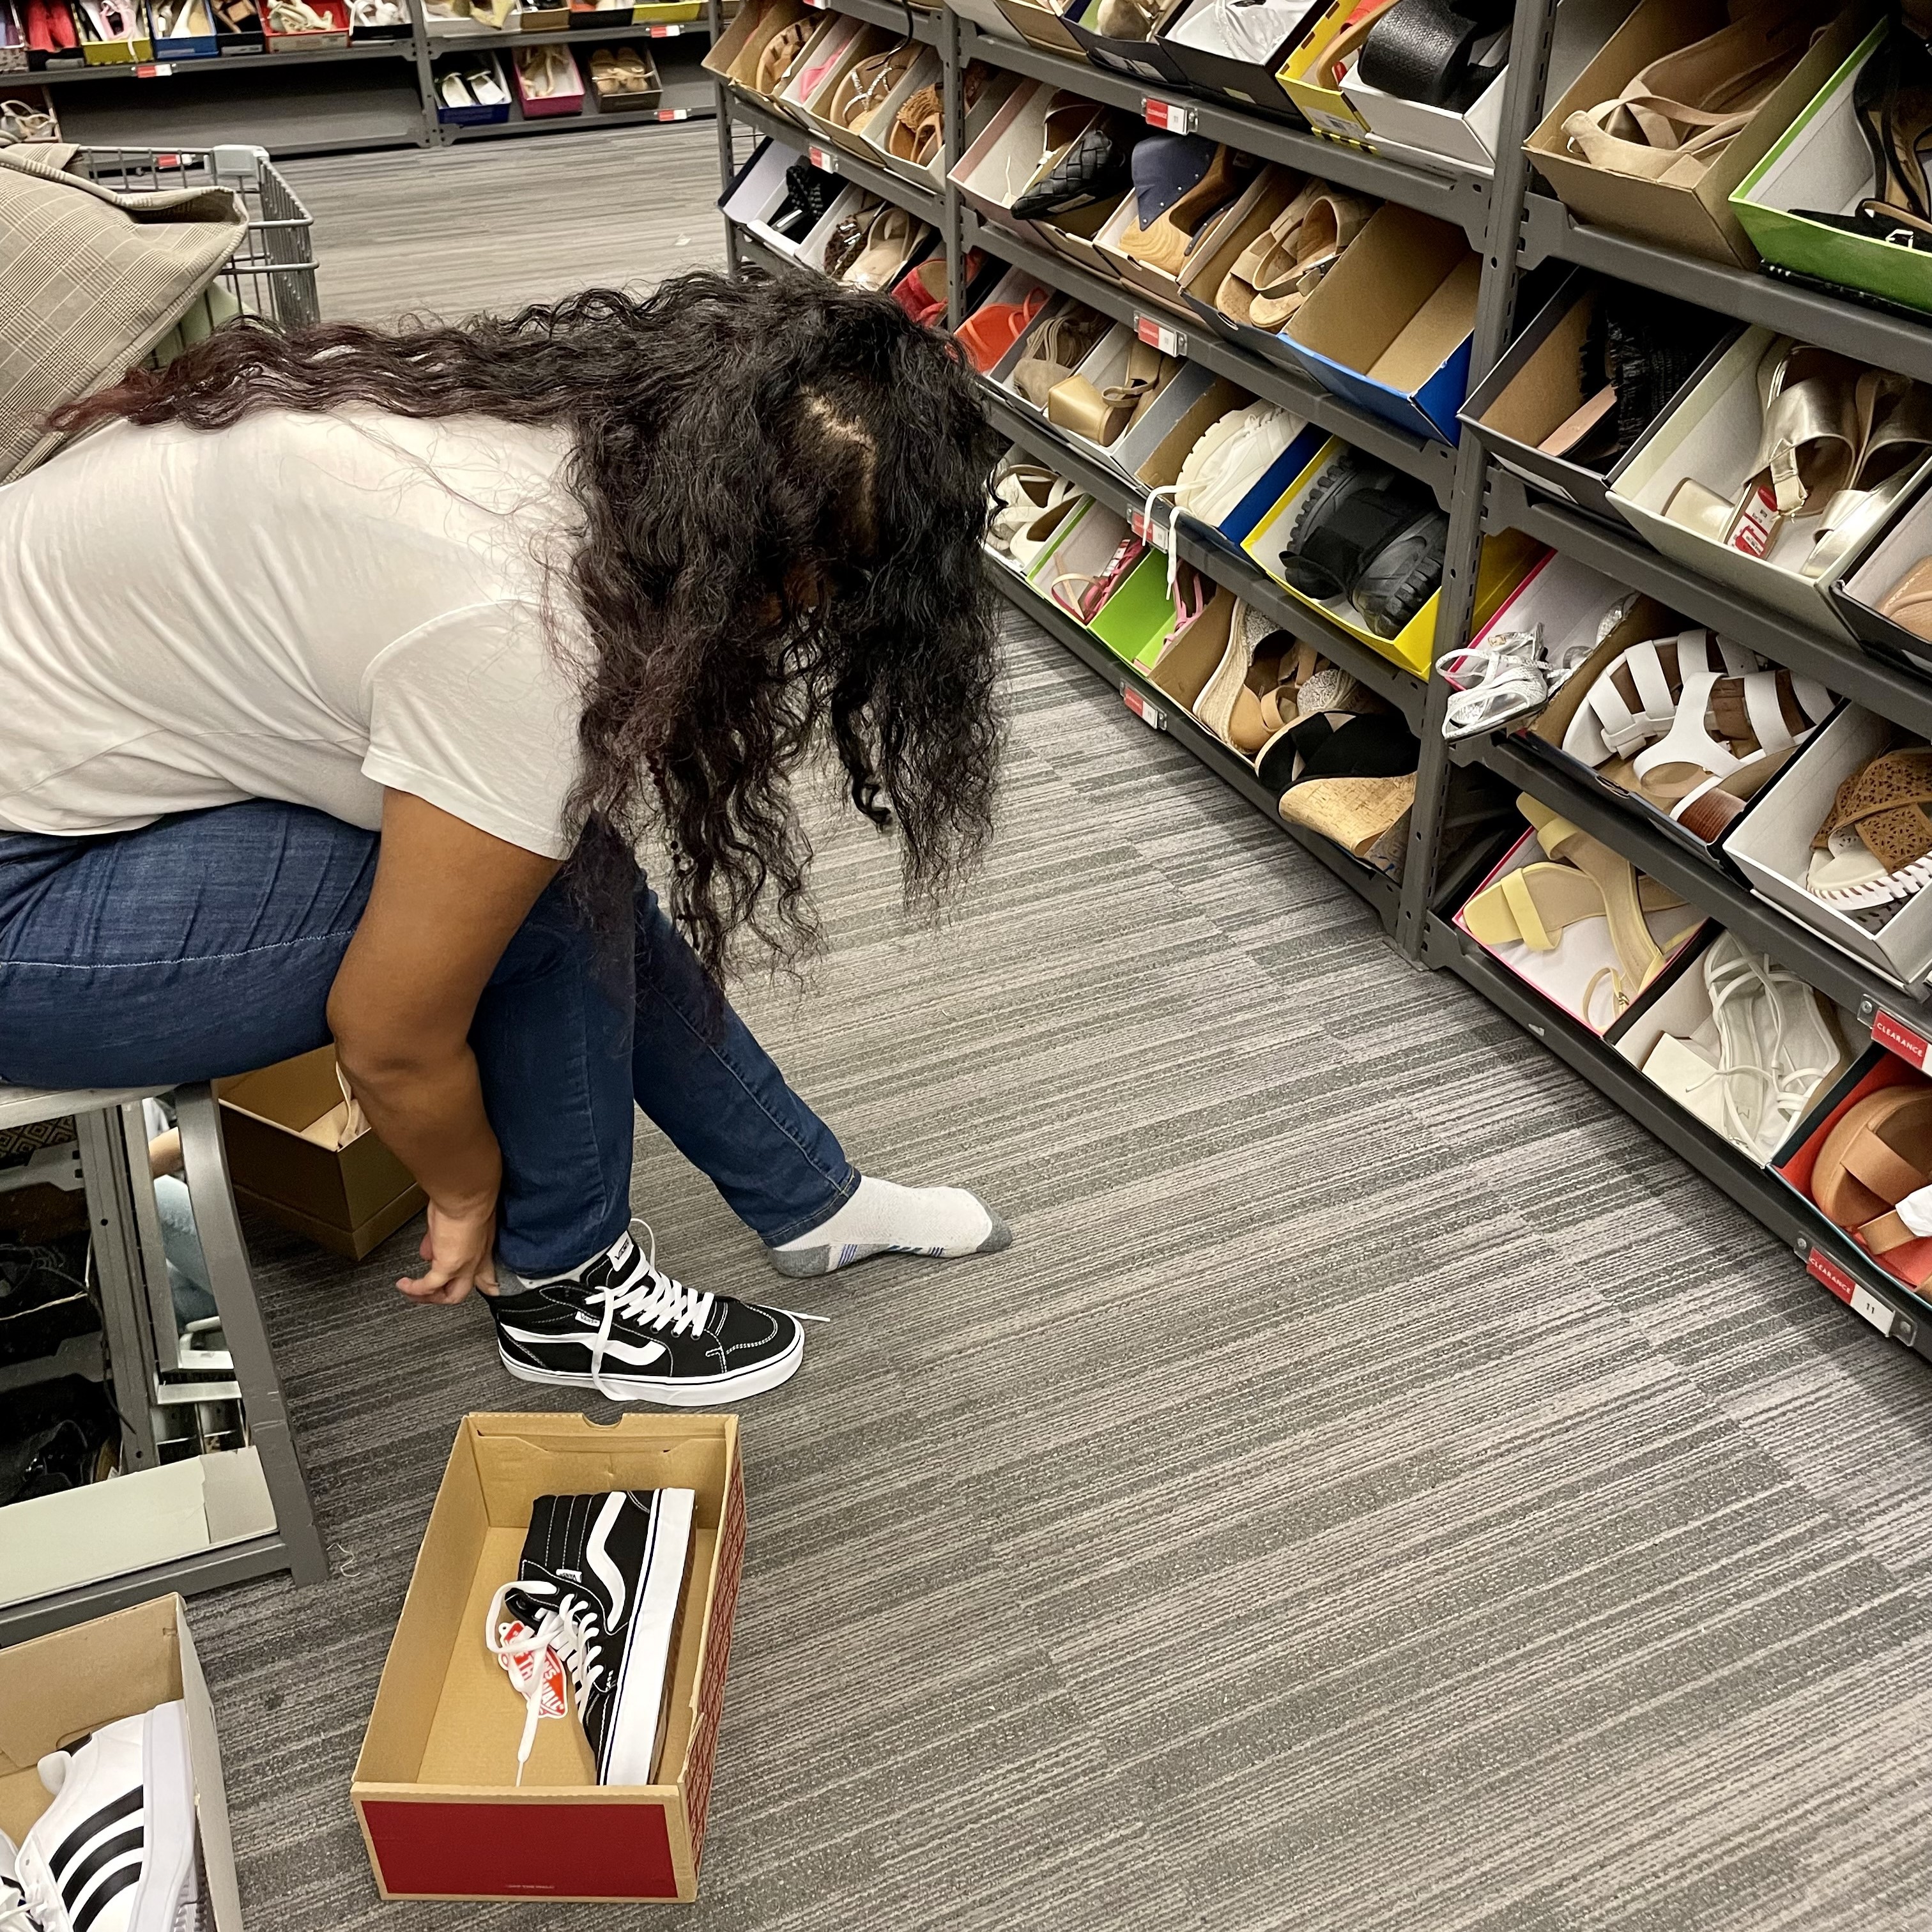 Teen trying on shoes